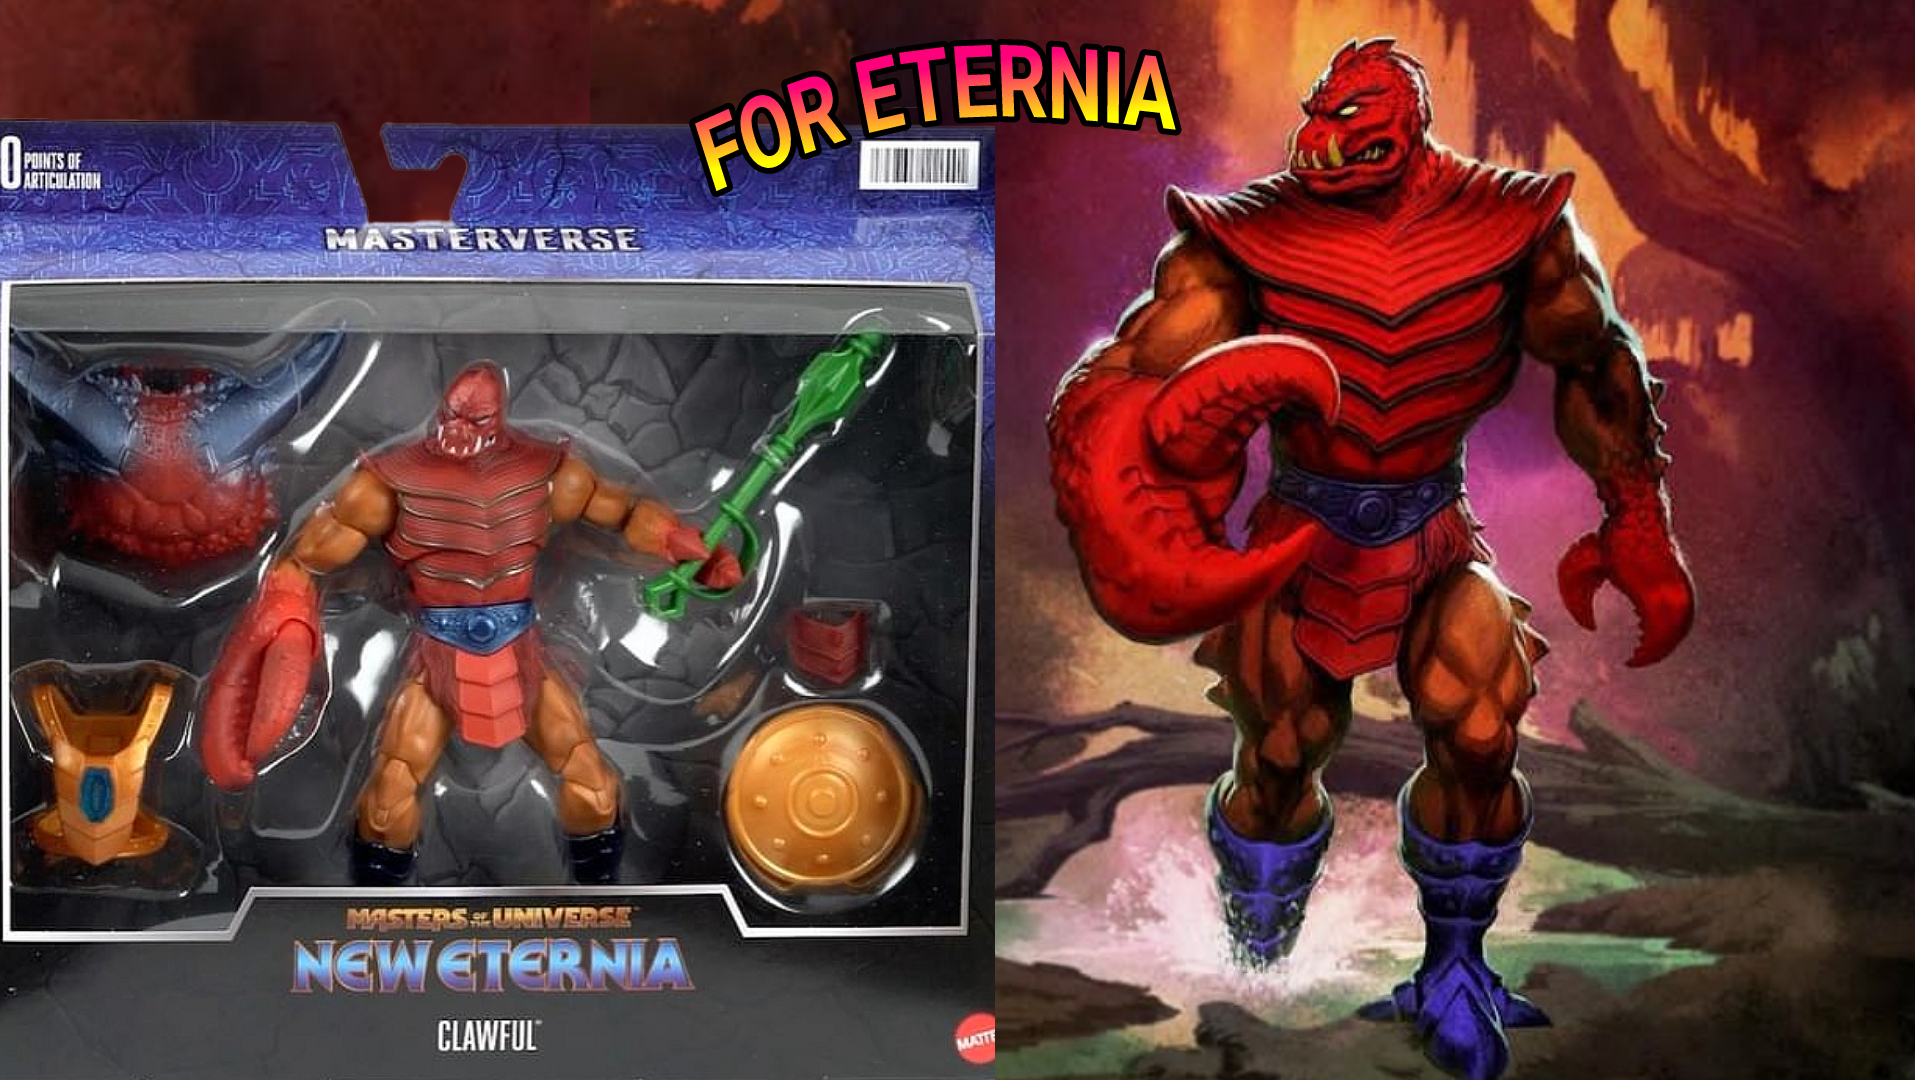 MASTERVERSE New Eternia Clawful Packaging & Artwork reveal confirms it’s a Wave 9 Deluxe